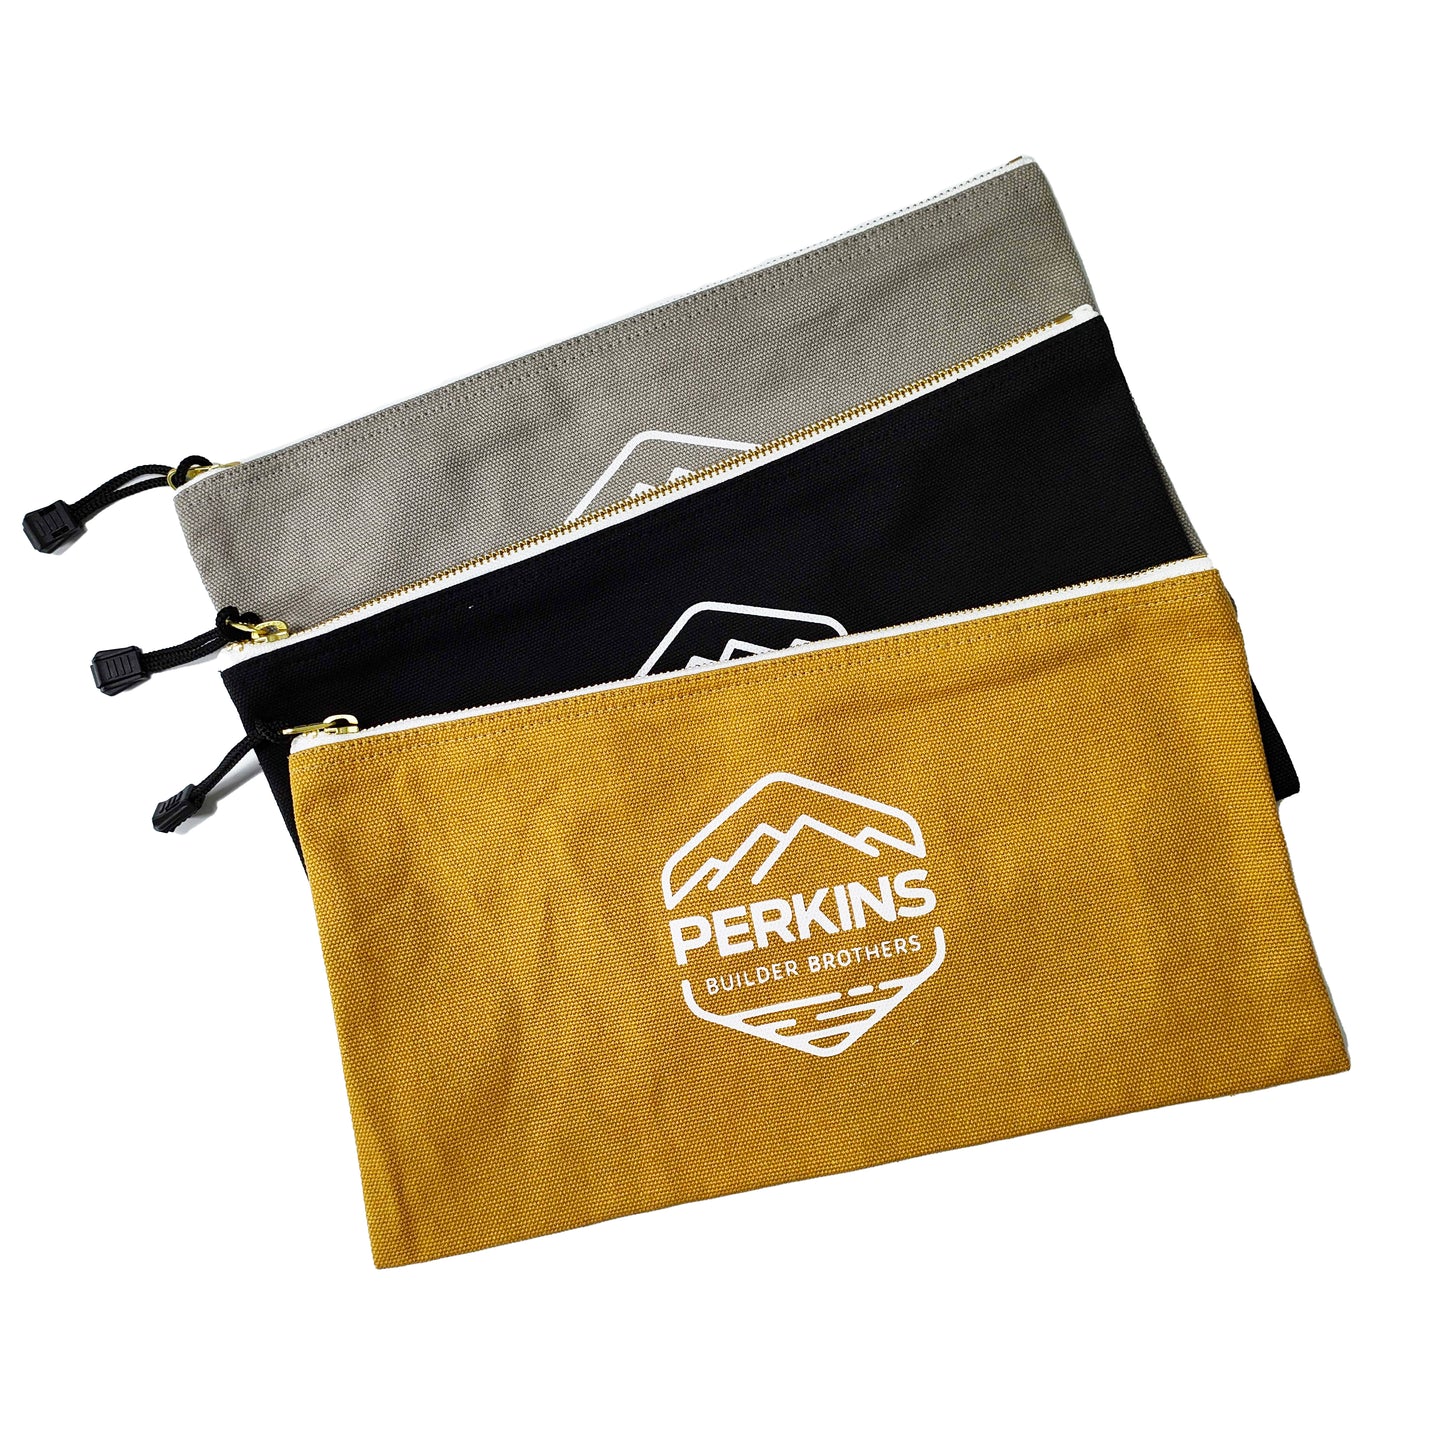 Perkins Builder Brothers Canvas Tool Pouch Zipper Bag, 3-Pack, Black/Brown/Grey